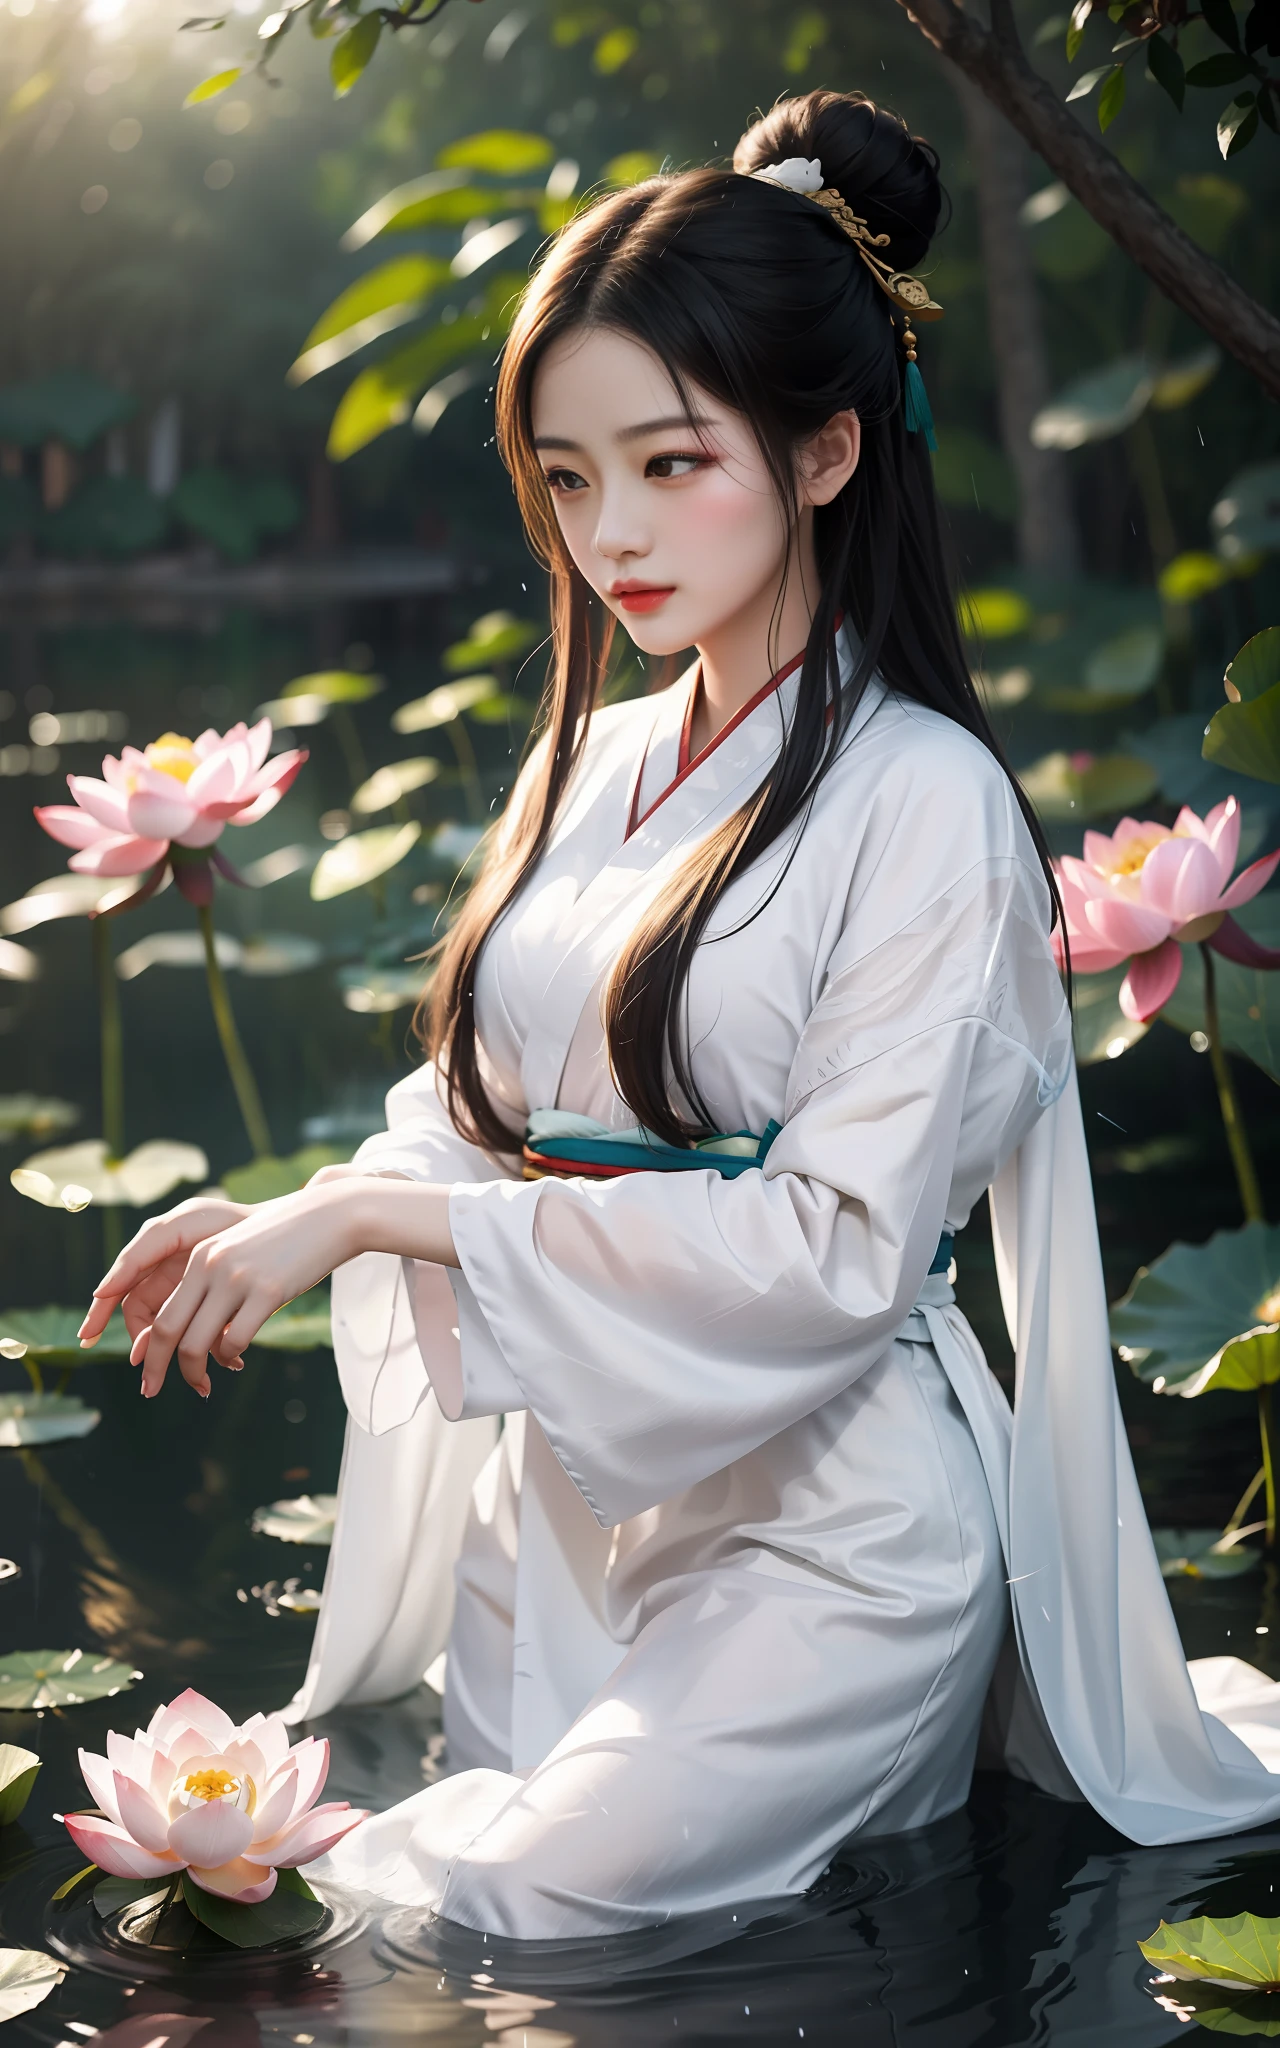 realistic, big vista, wide angle lens, intricate details, super detailed, natural skin texture, 1 girl, hair bundle, bun, beautiful Chinese woman in white hanfu robe cloak, fairy, white mist, golden light, white mist, outdoors, in Hangzhou West Lake, in ancient Chinese pavilion, (colorful, vivid, sunny, cool light: 1.2) lotus leaves in pond, delicate facial details, dynamic poses, exquisite details, wide view, epic details, global illumination - ar 3:2 - Q 5 - V 5.1 - Style RAW-S 750, style influenced by ancient Chinese art, complex, high detail, sharp focus, dramatic, photorealistic painting art, lotus leaf, spring rain, bright, light, atmospheric, bright tones of spring, super detail, 16k, best quality, soft light, space, crystal clear, natural light, surreal photography,